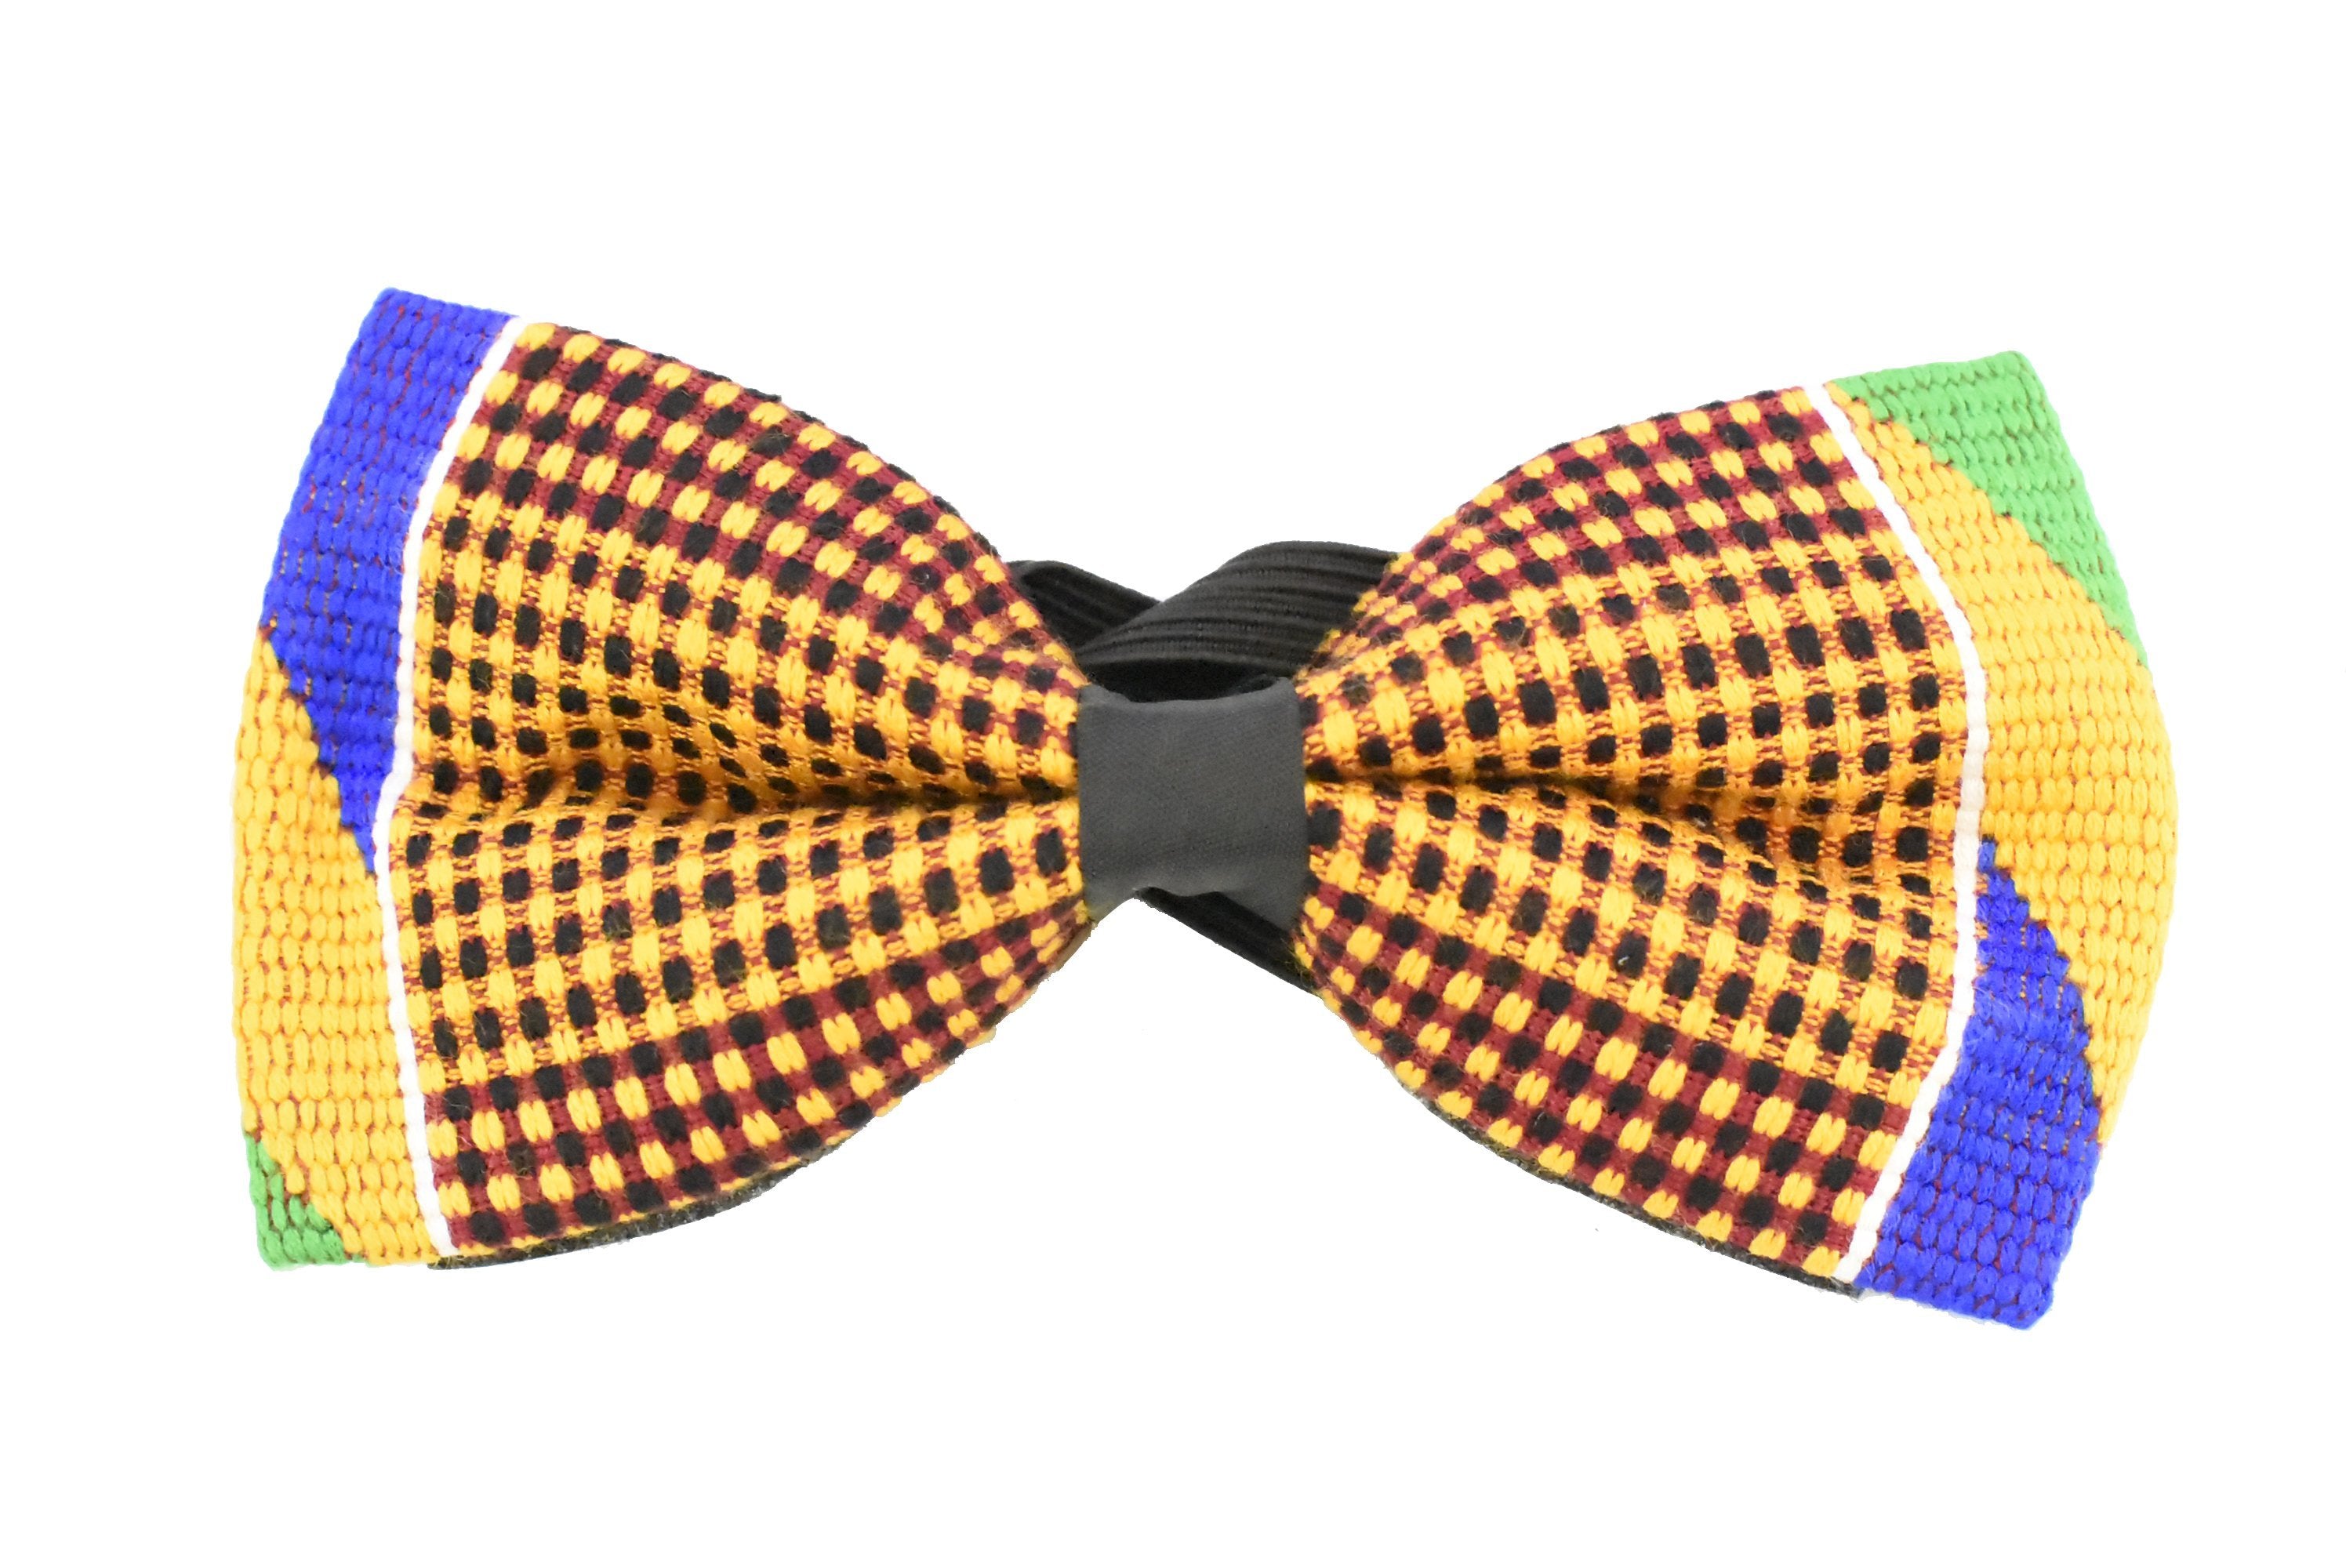 Handwoven Kente Cloth Bowtie - AFRIKAN ATTIRE - #african_clothing - ACCESSORIES